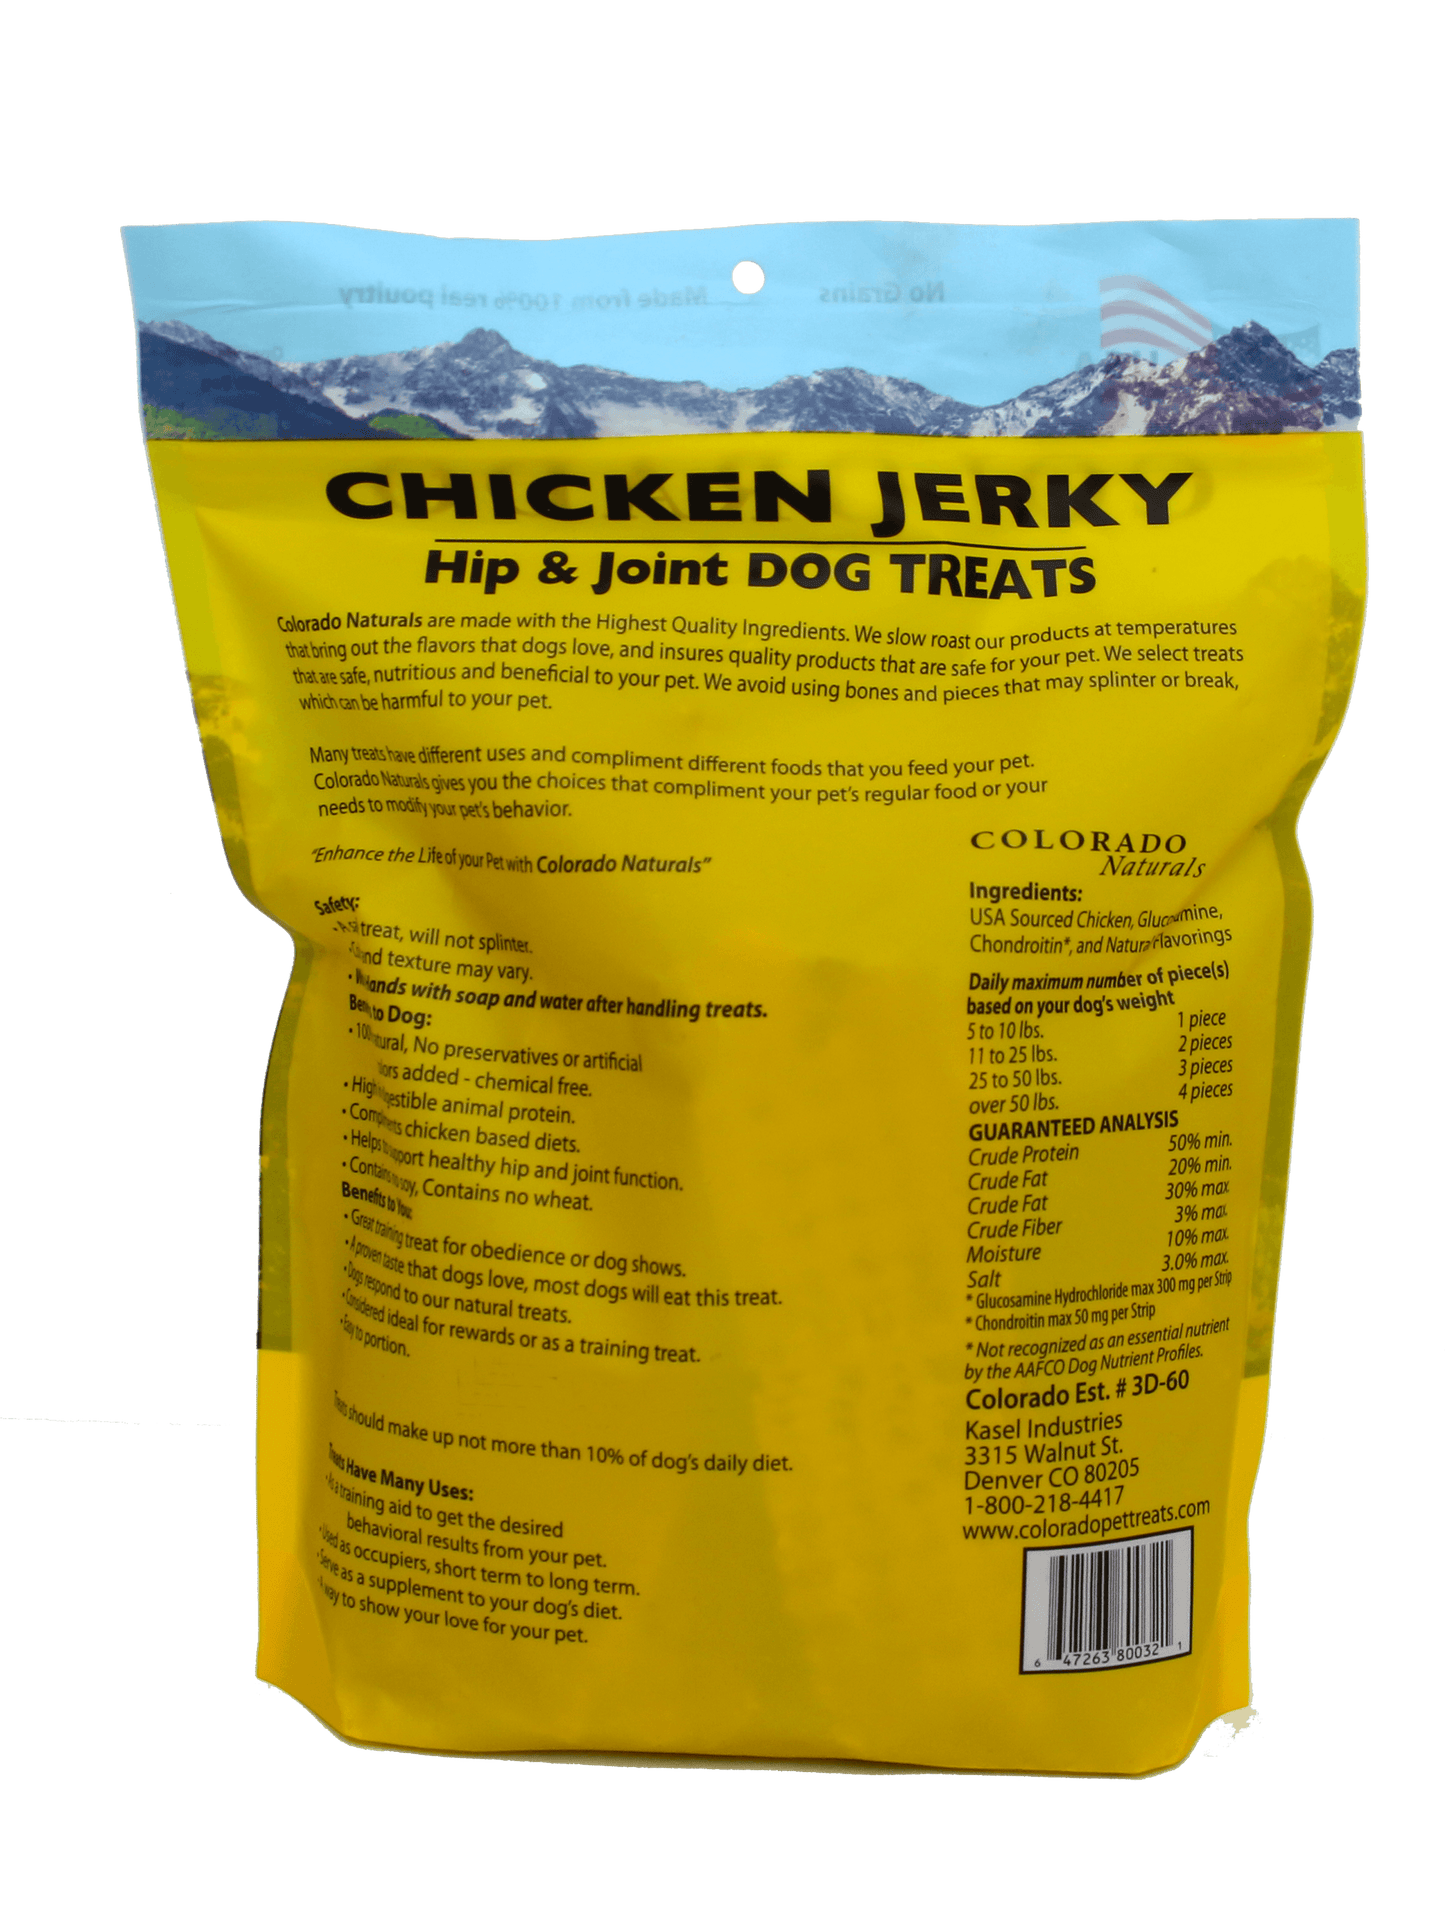 A photo of the back of the best 16 oz Hip and Joint Chicken Jerky Dog Treats from Colorado Pet Treats by Colorado Naturals. Colorado Pet Treats - All-Natural, All-American Dog Jerky, Jerky Chips, and Bones - Treat your furry friend to our delicious and healthy pet treats made with only the finest ingredients sourced in the USA. Delicious and chewy all-American dog jerky made with natural ingredients sourced in Colorado.